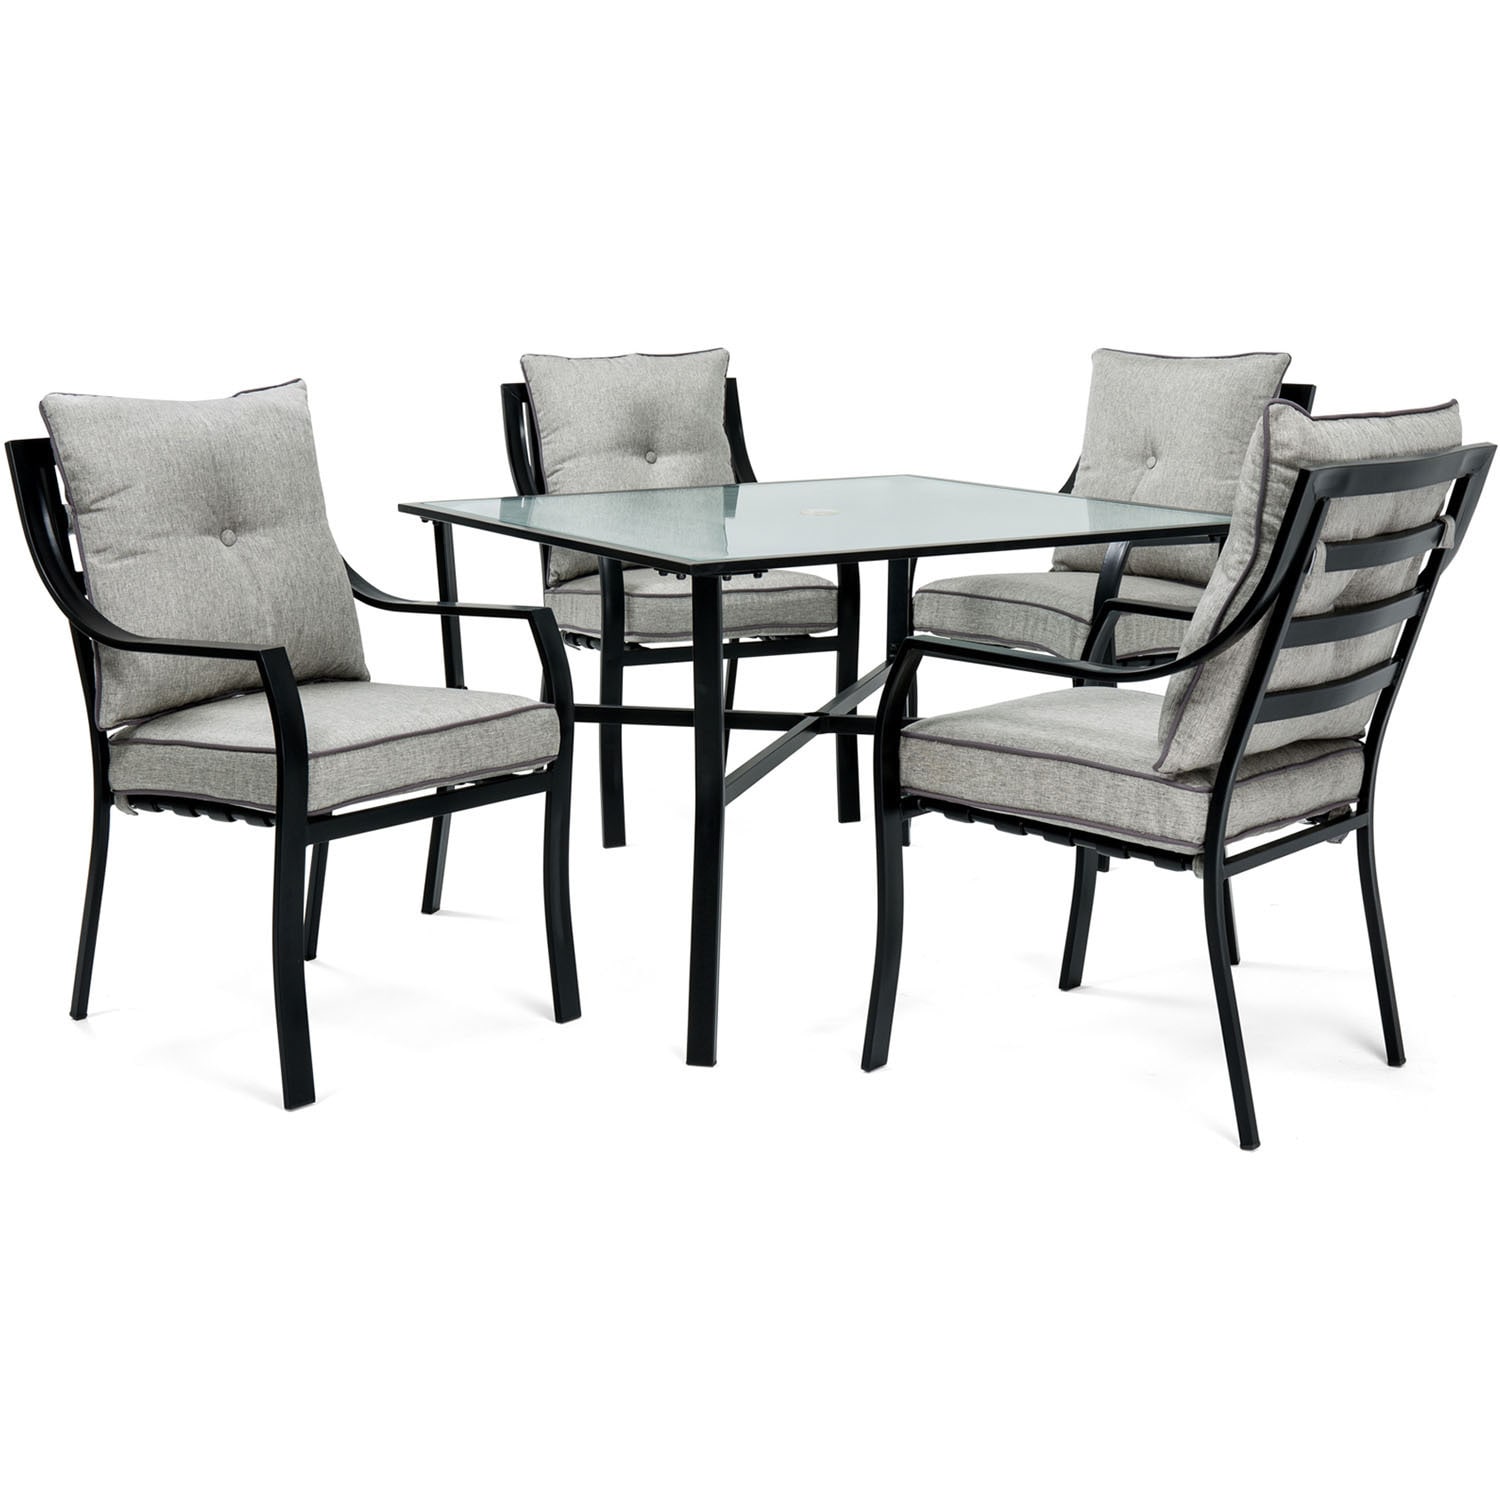 Hanover Lavallette 5 Piece Dining Set In Grey